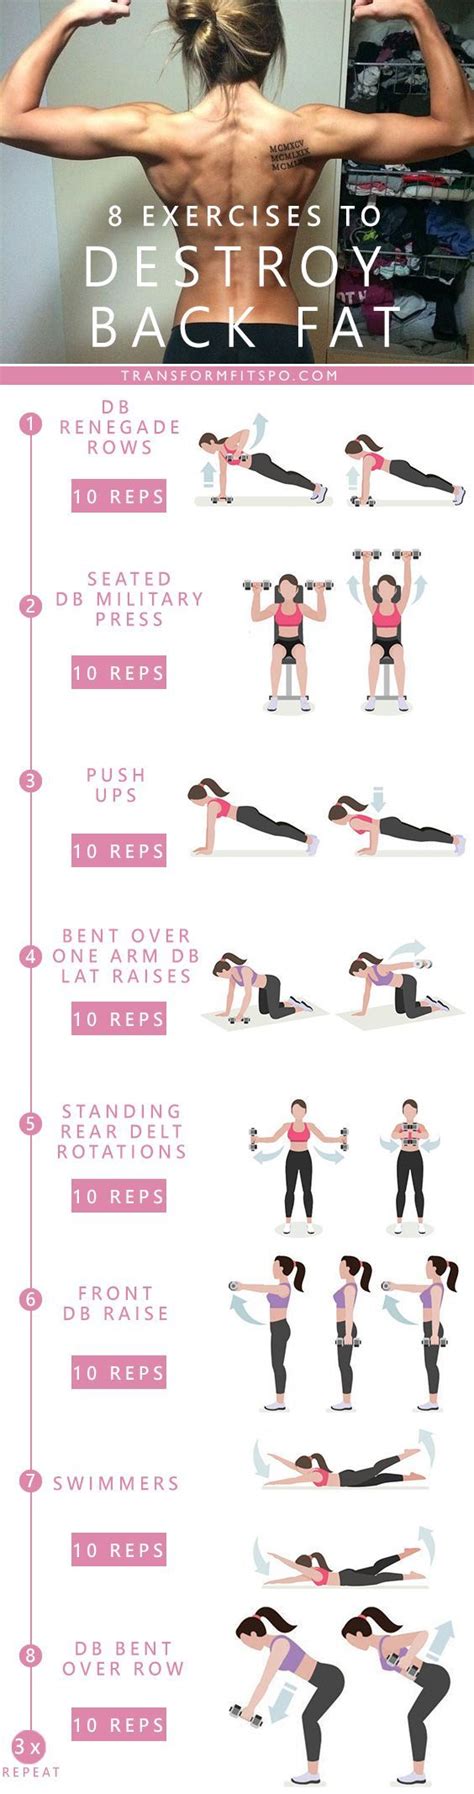 workout exercises womensworkout workout femalefitness repin and share if this workout